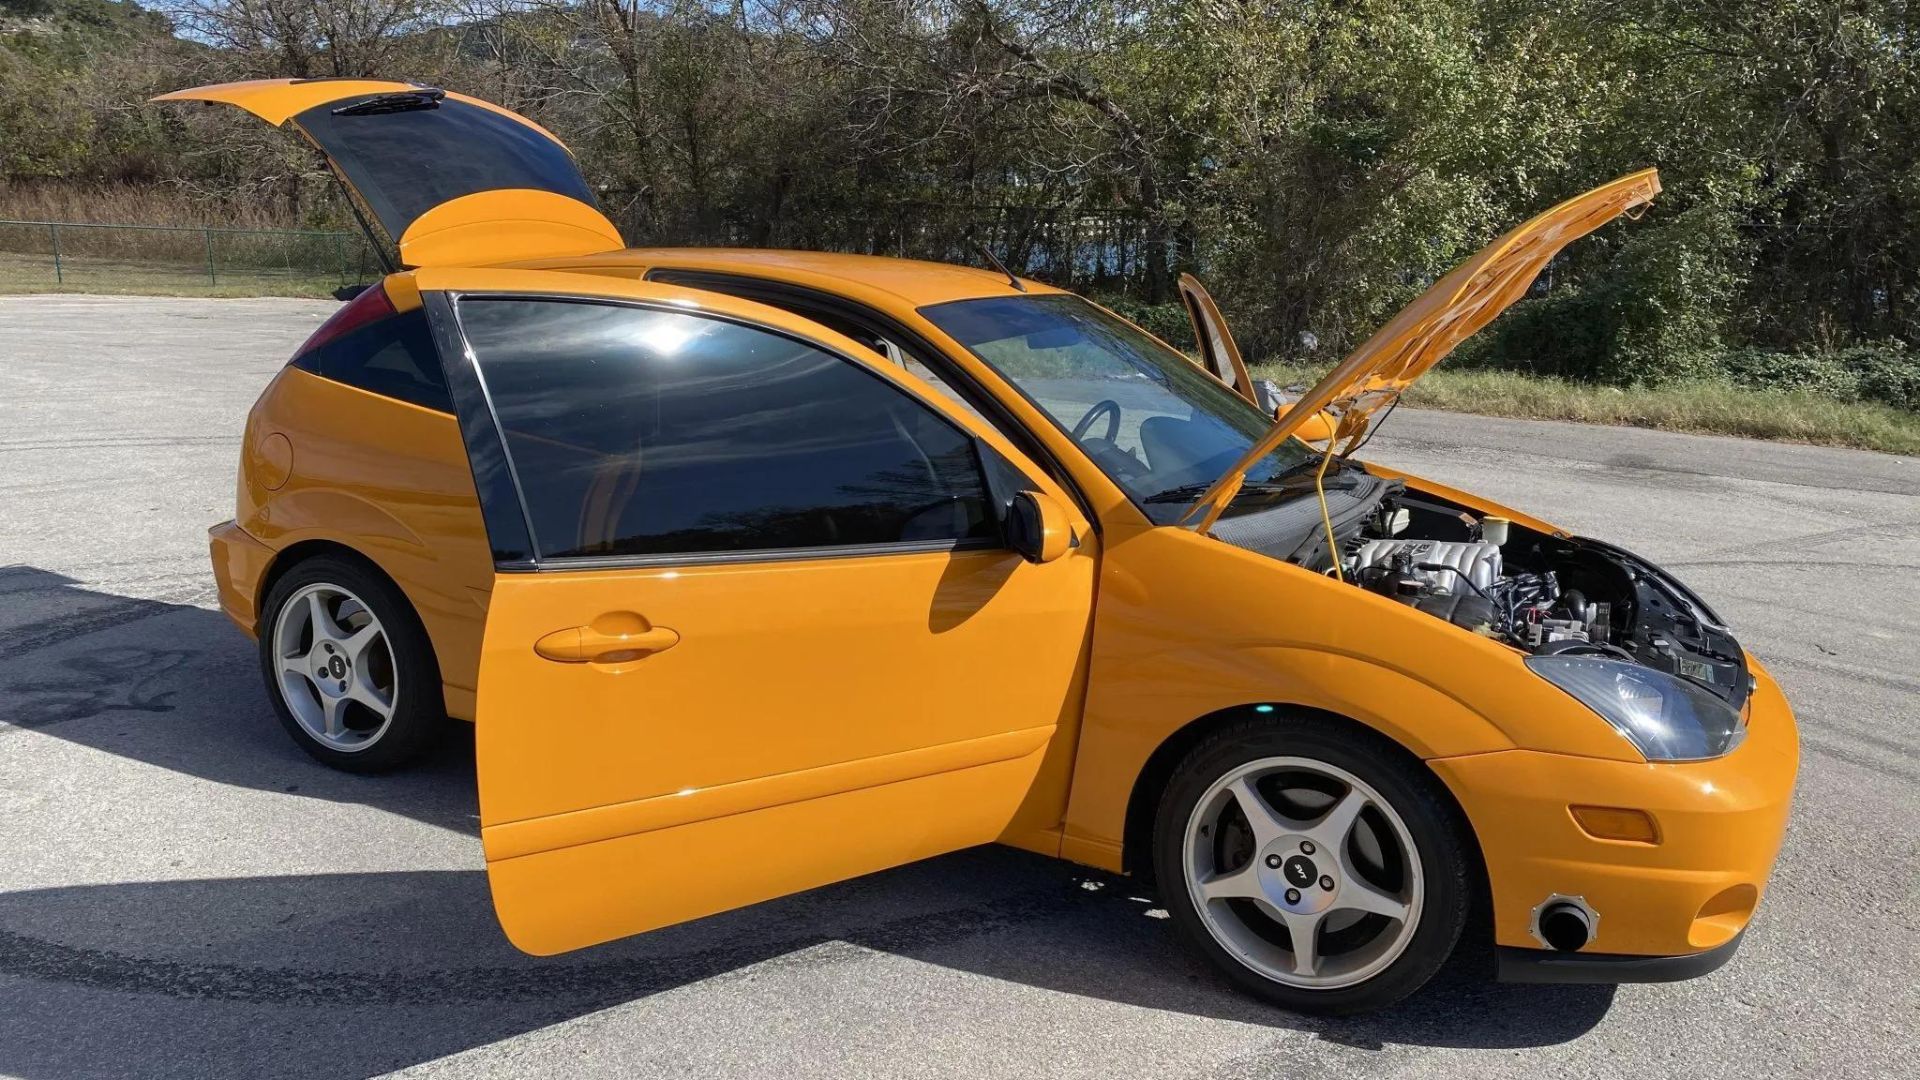 Modified 2003 Ford Focus parked with all doors open